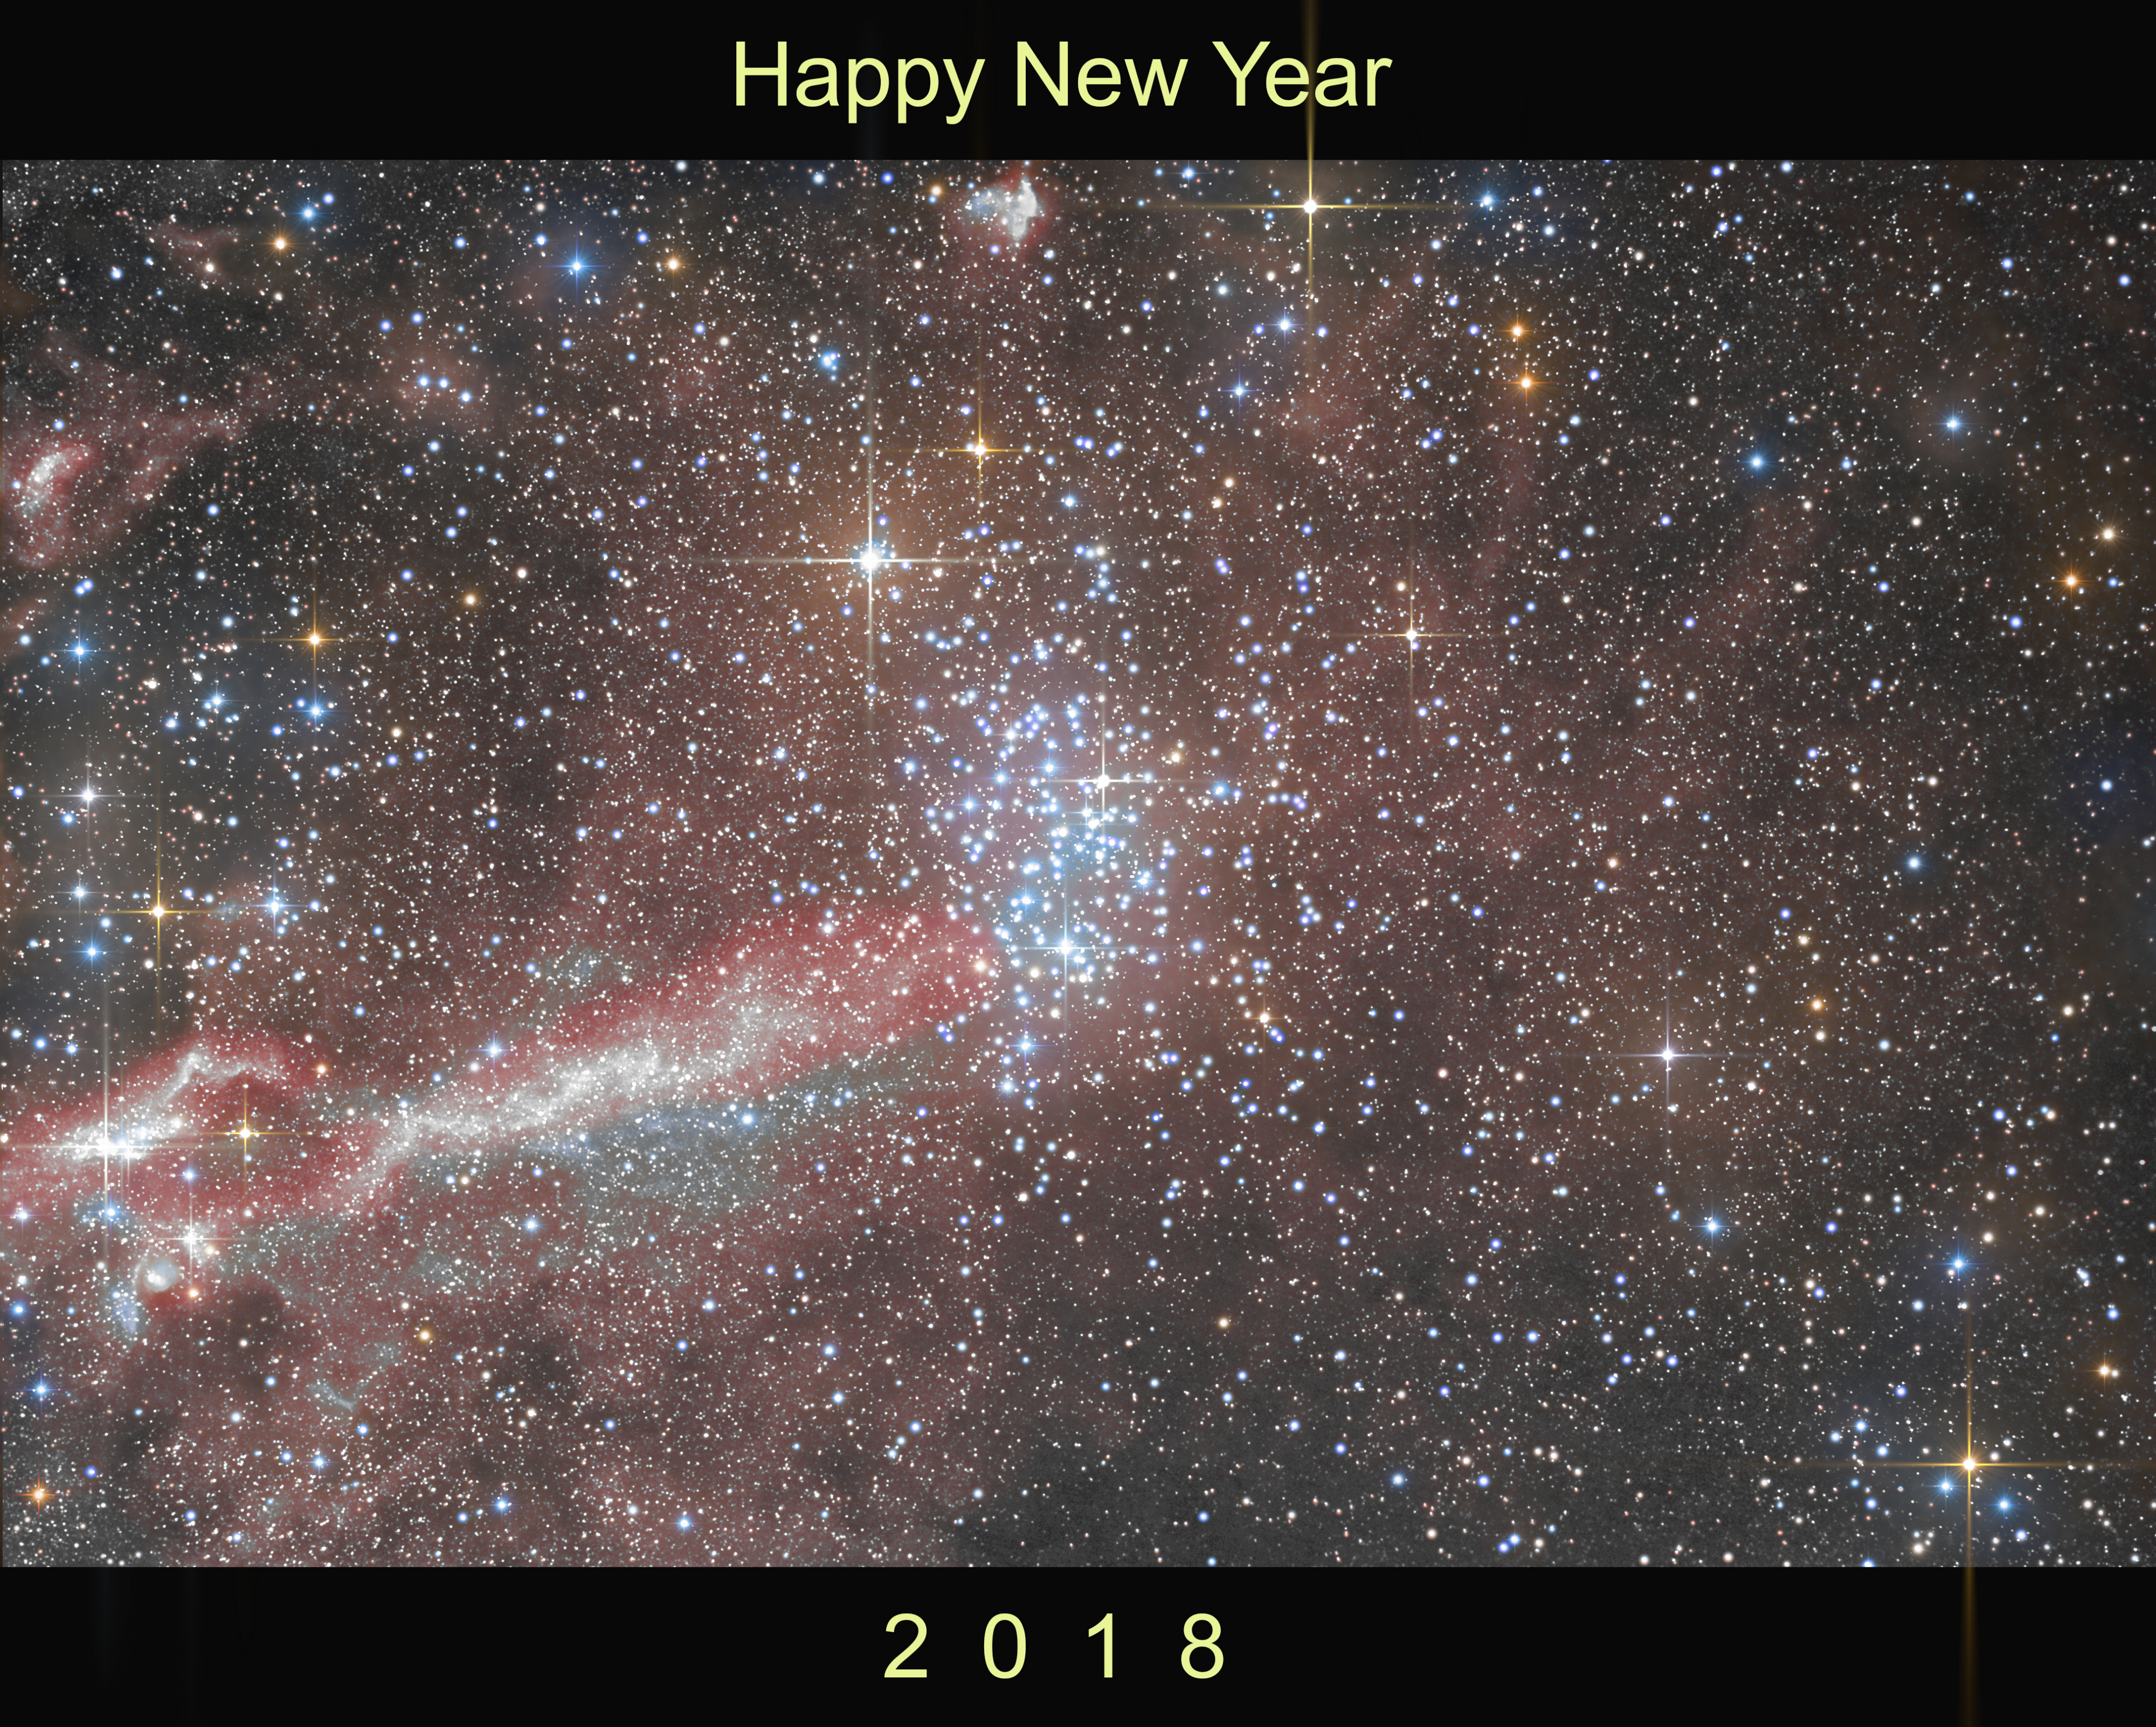 Carène - NGC3532 - Whishing Well Cluster - Happy new year 2018